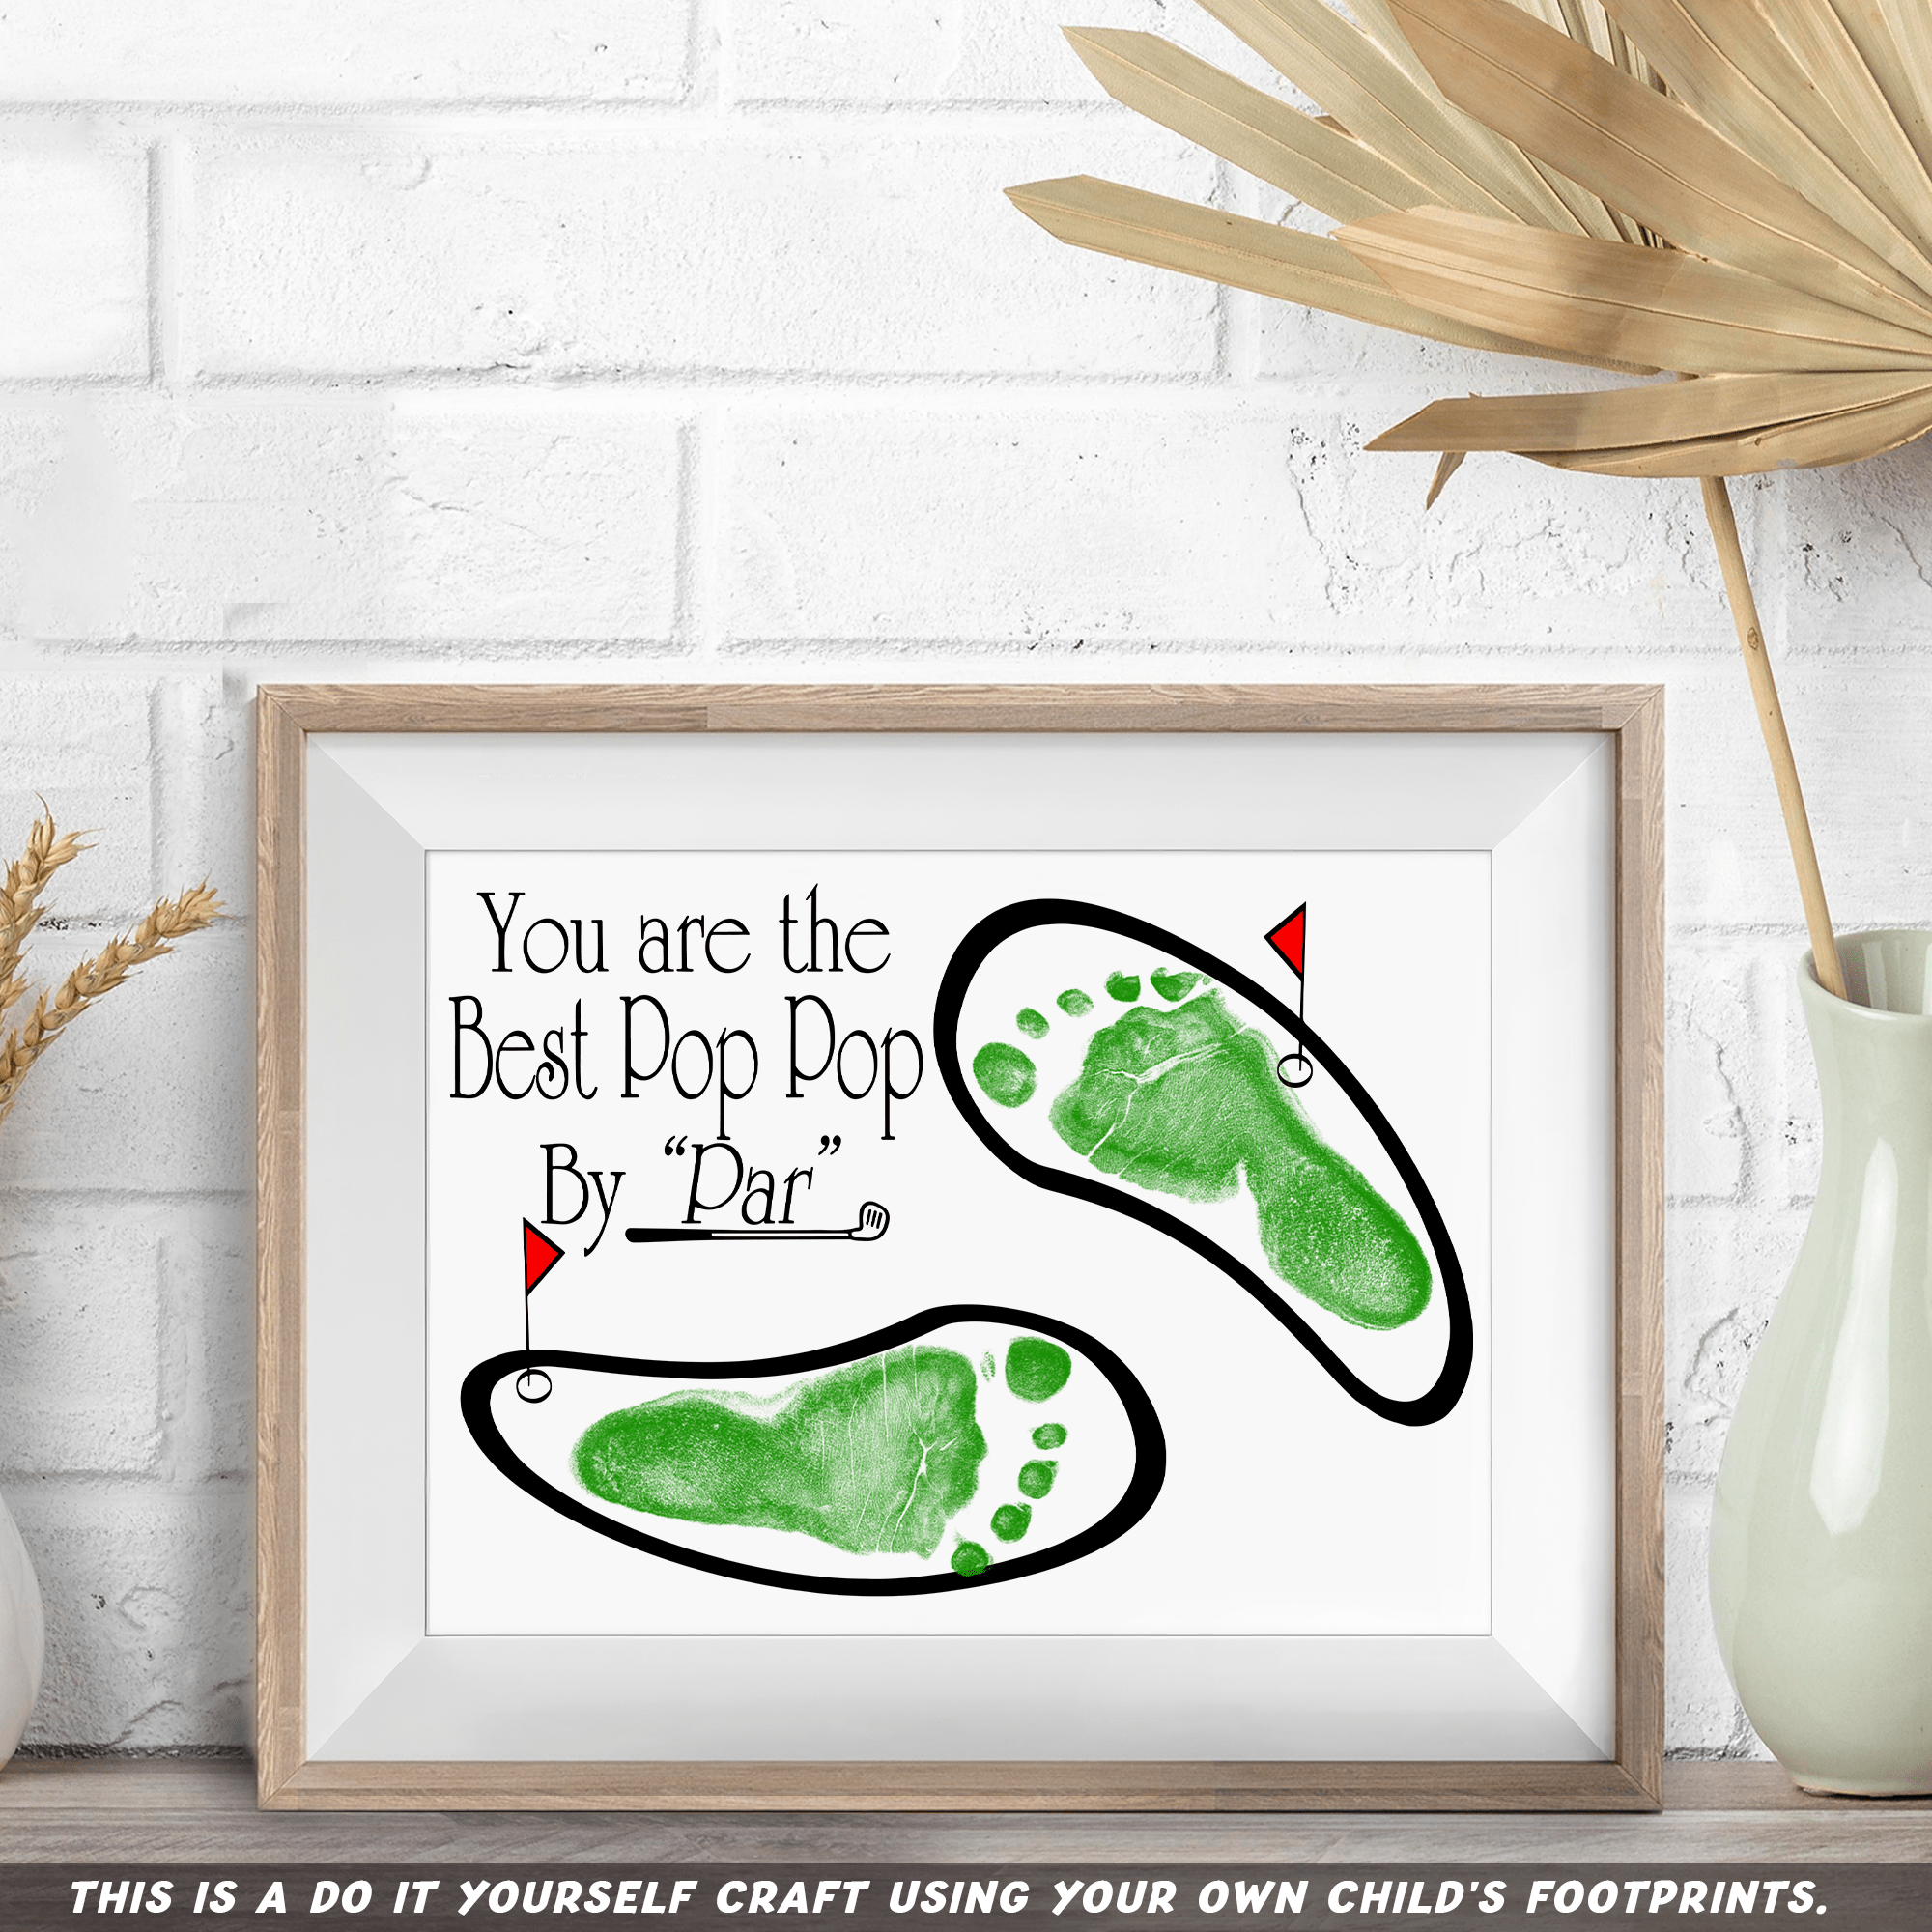 GeckoCustom Happy Father's Day You Are The Best Pop Pop DIY Footprint Art Picture Frame HO82 890600